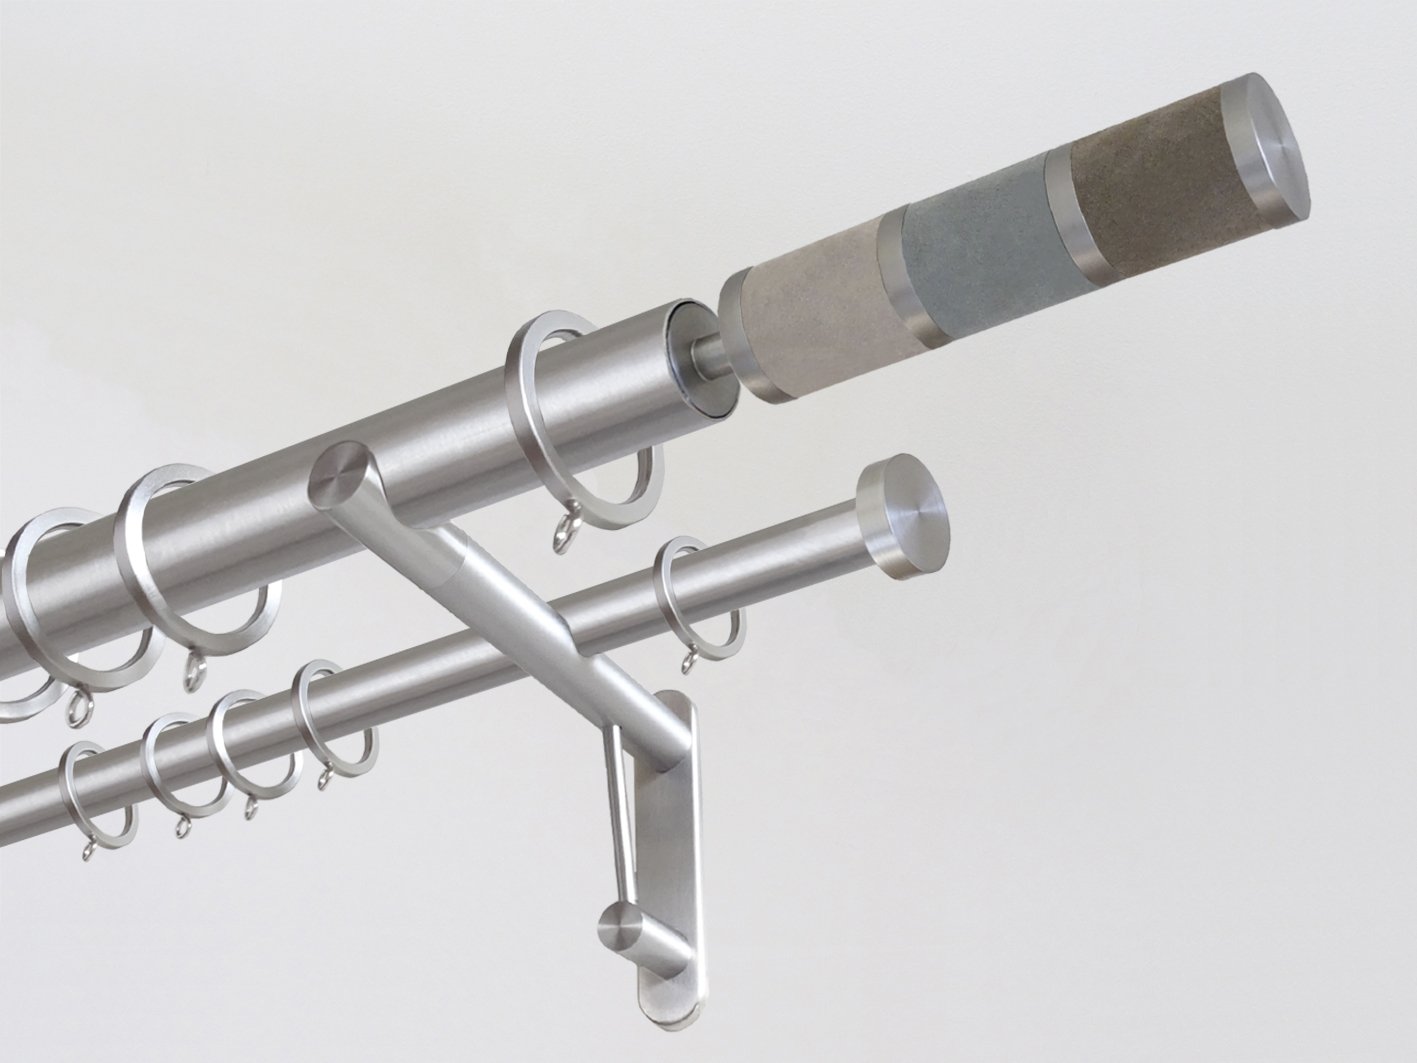 30mm diameter stainless steel double curtain pole system with Combination finials in suede